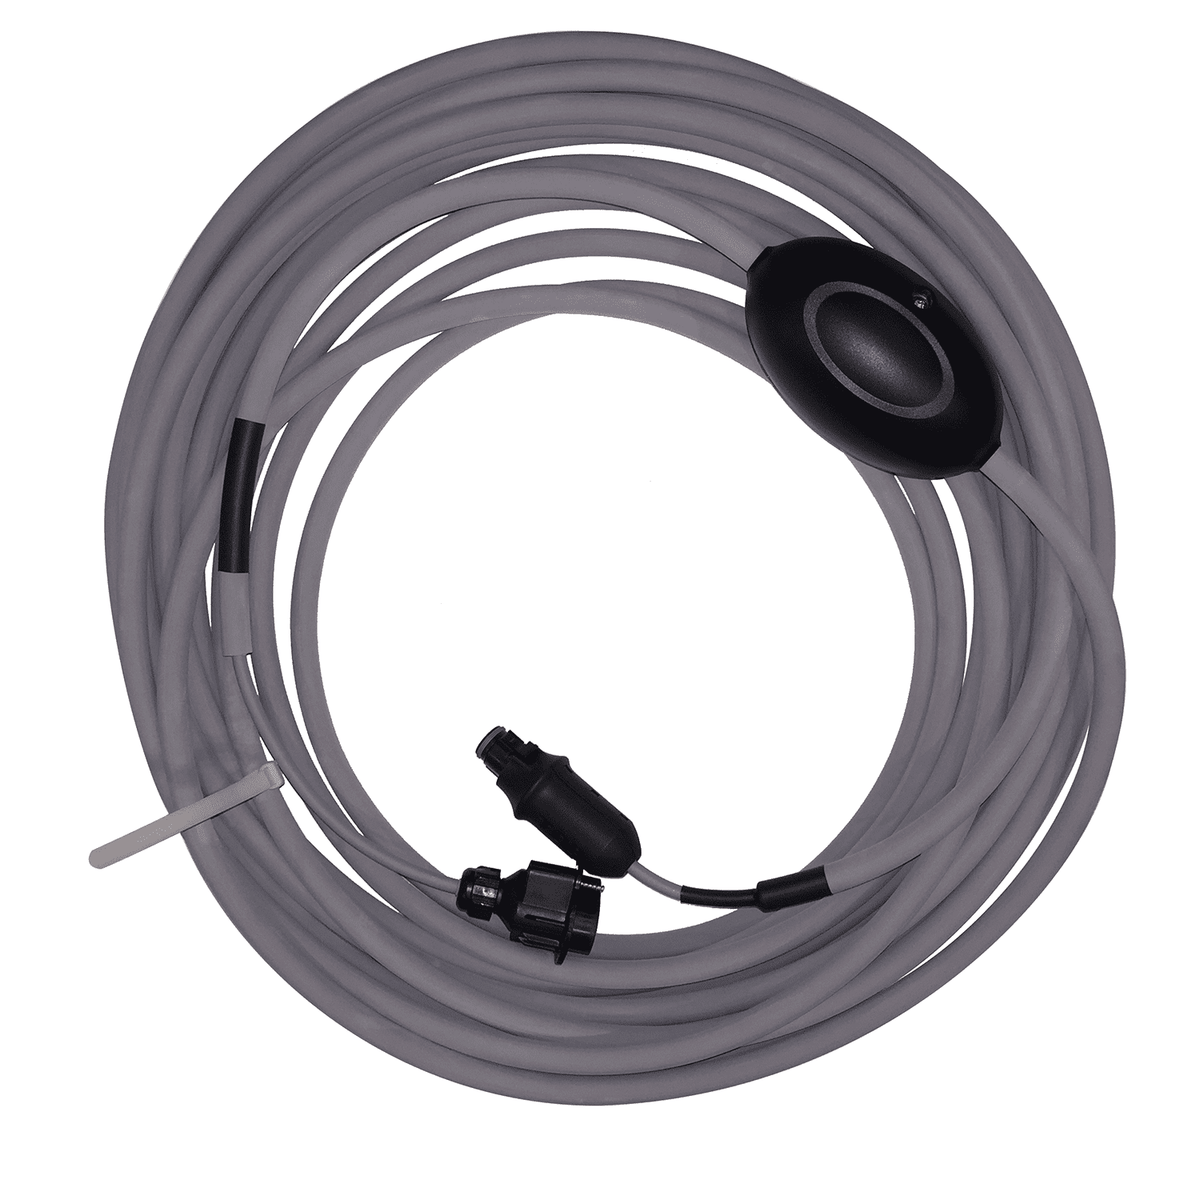 Zodiac CX35 Floating Cable - 18m | R0632101